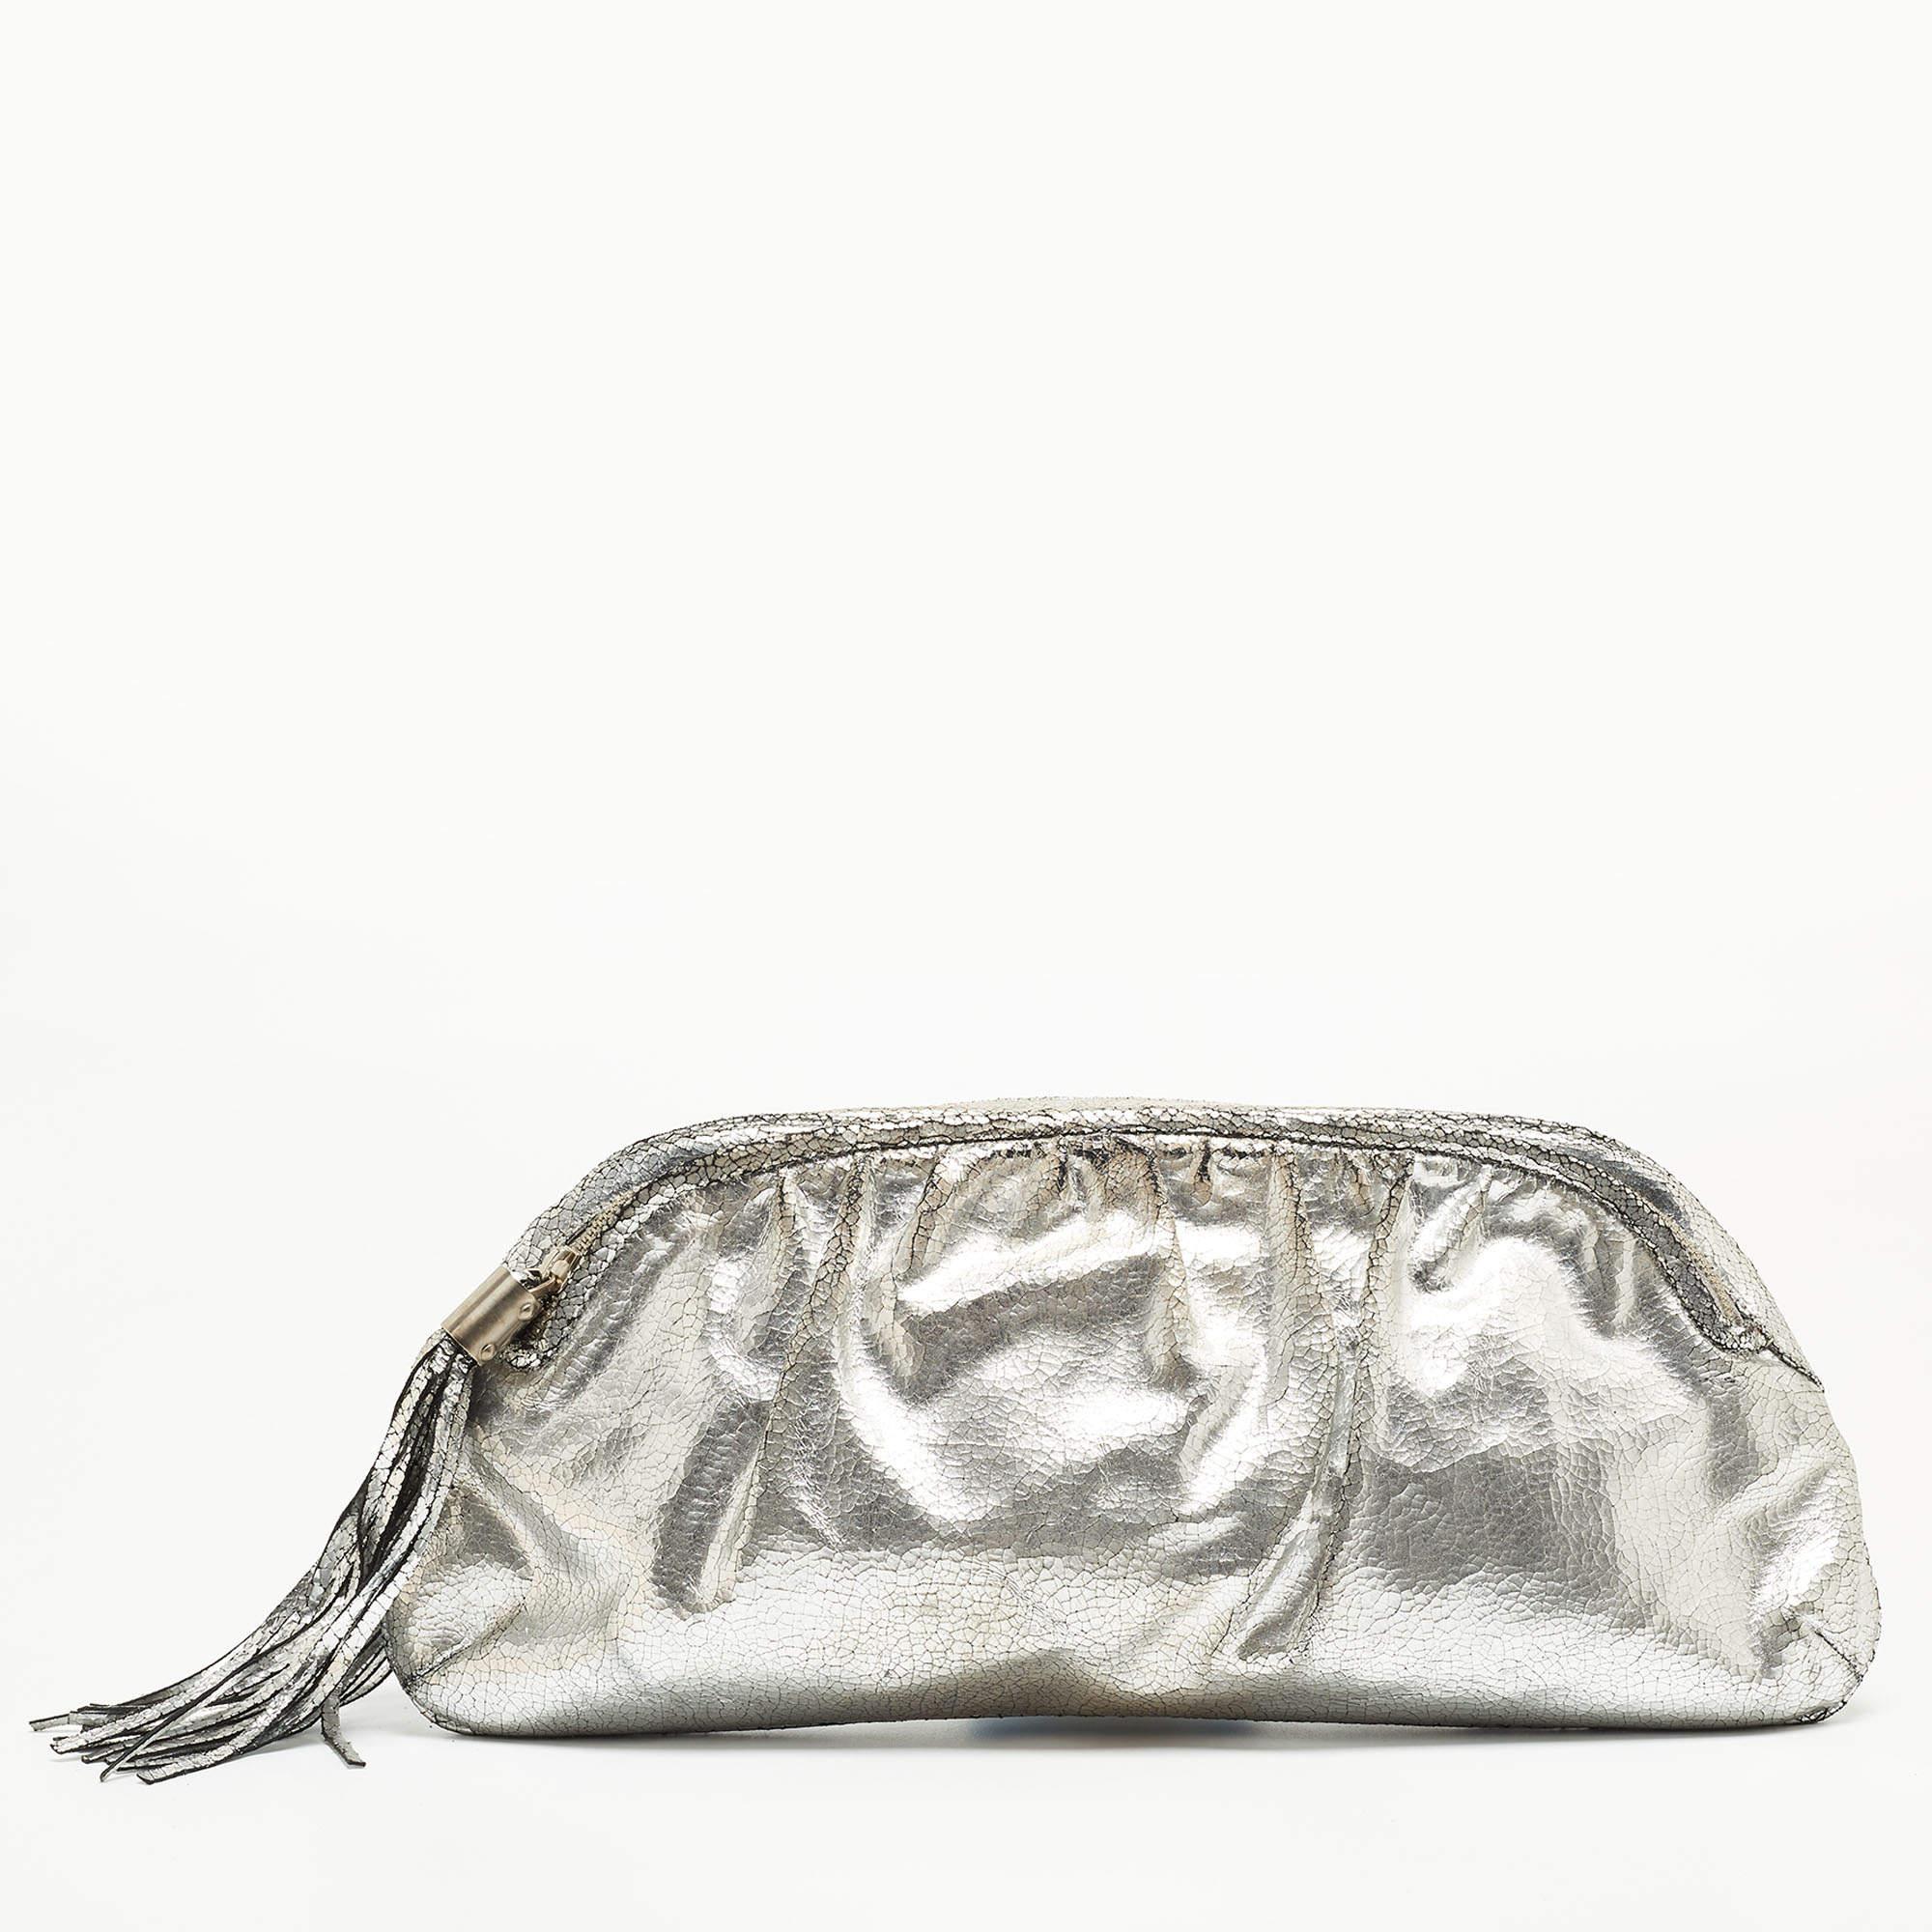 This clutch is just the right accessory to compliment your chic ensemble. It comes crafted in quality material featuring a well-sized interior that can comfortably hold all your little essentials.

Includes: Brand Dustbag

